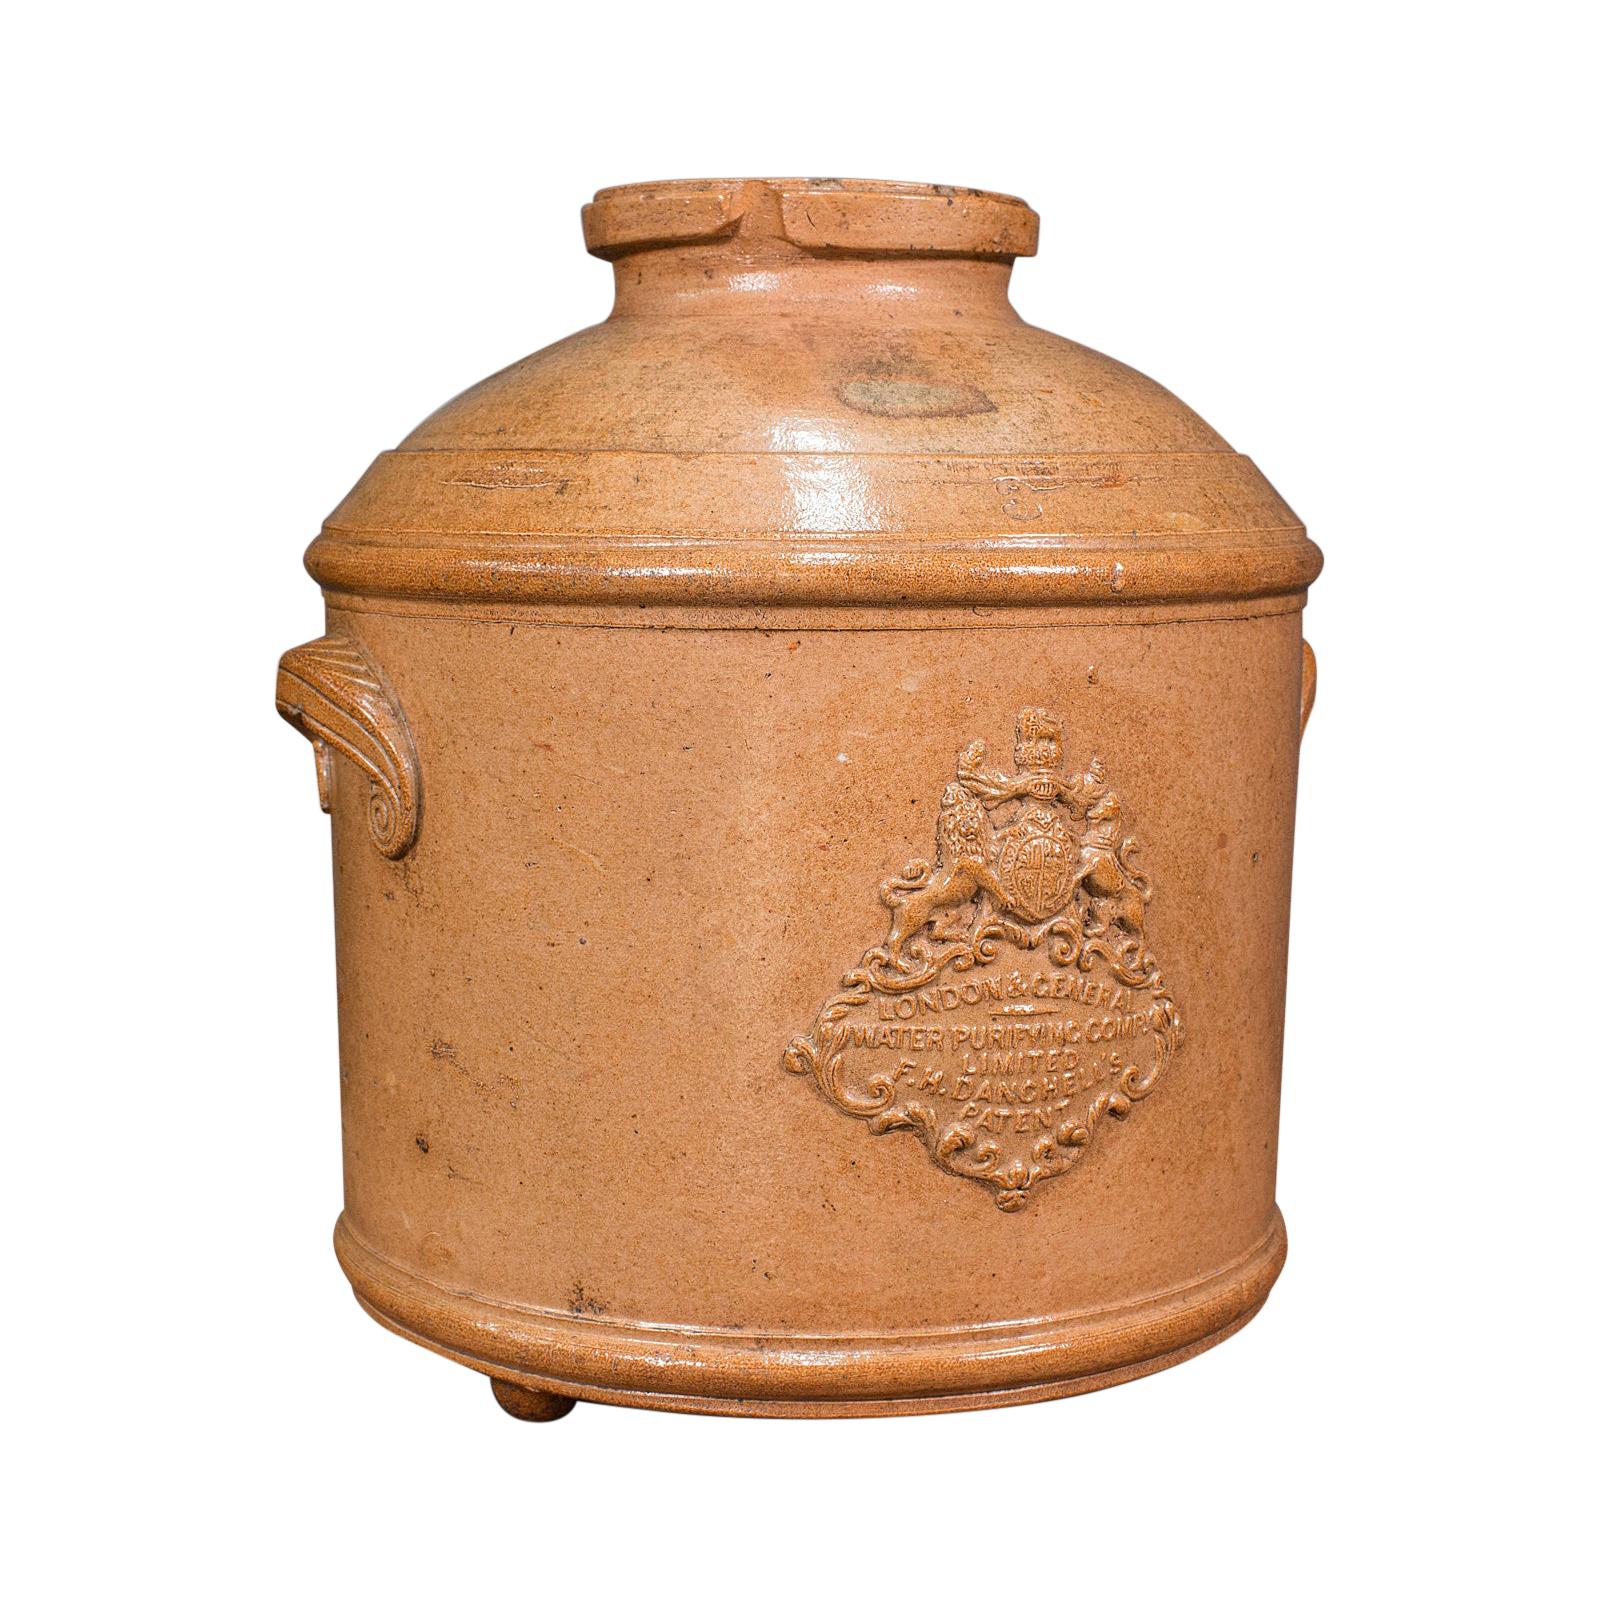 Antique Water Purifying Filter, English, Ceramic, Decorative, Victorian, C.1870 For Sale